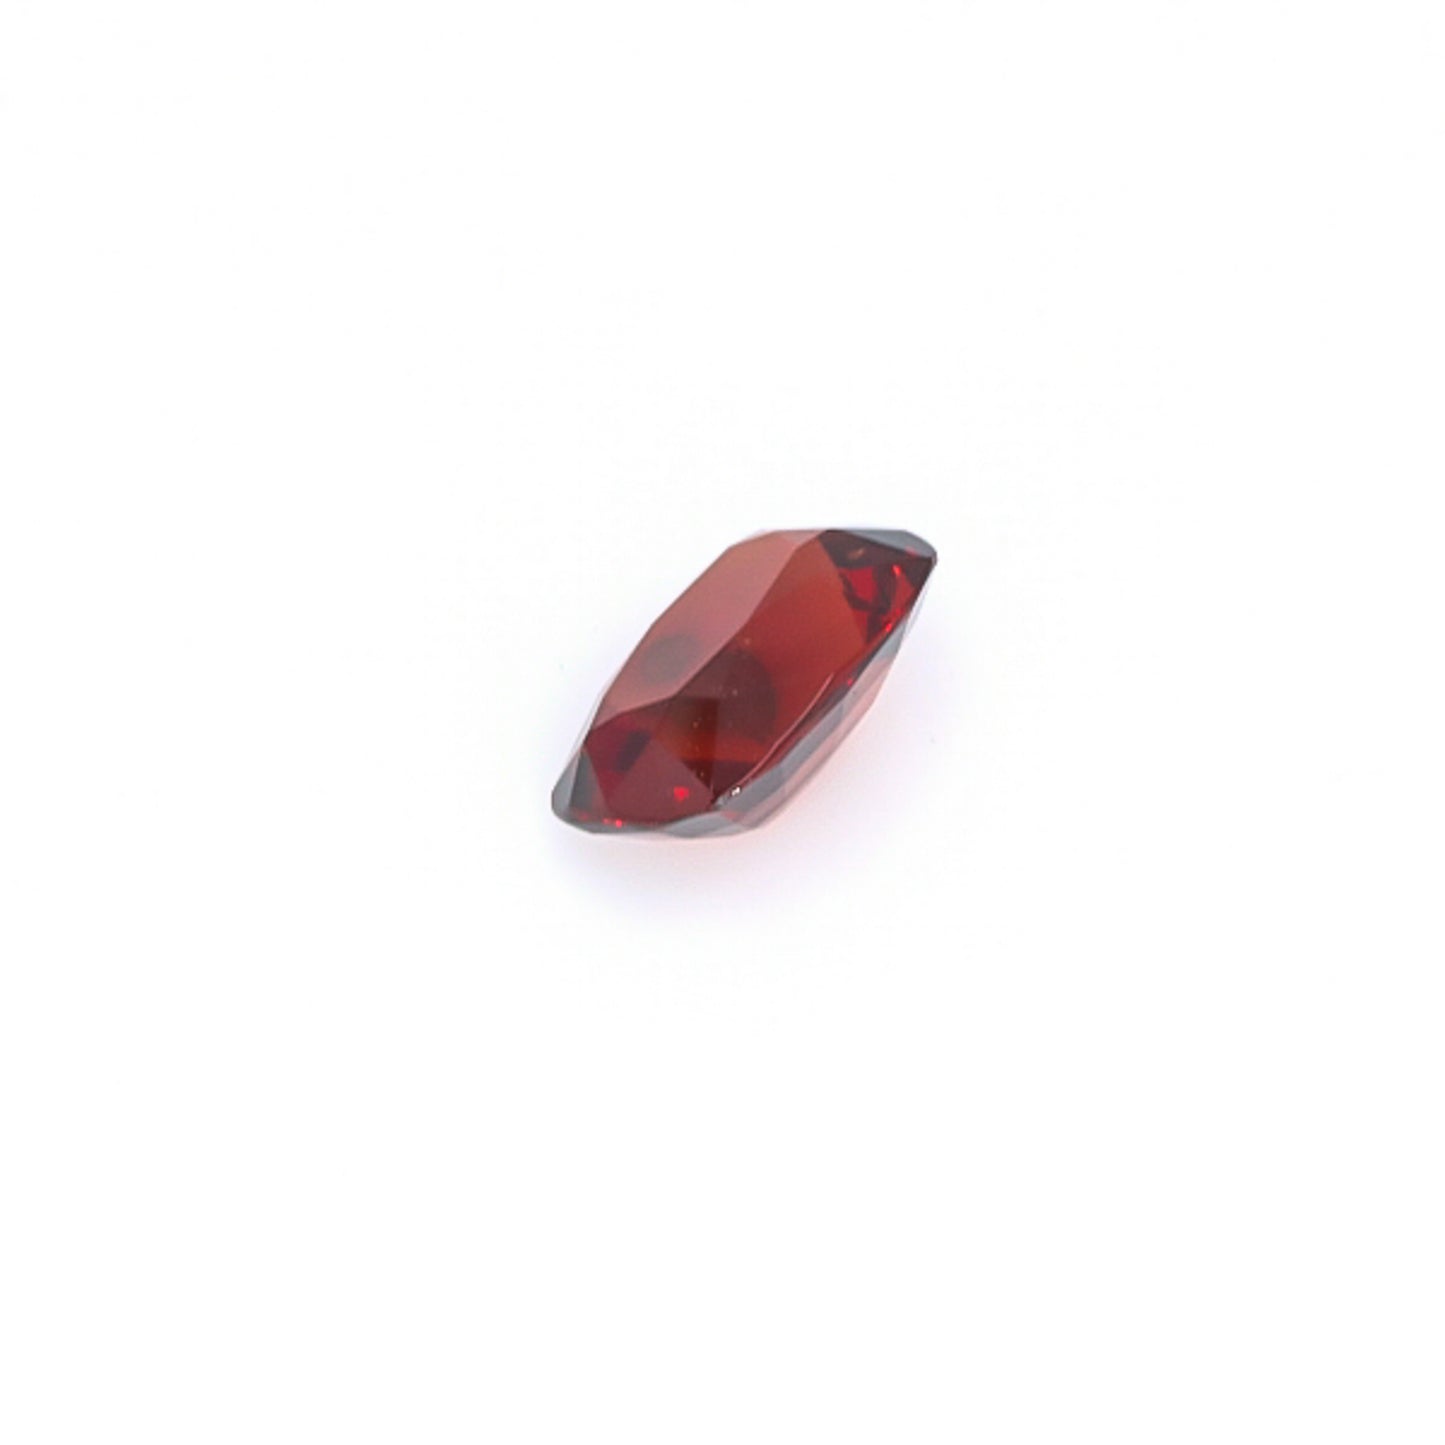 Load image into Gallery viewer, Natural Unheated Red Spinel 2.86 Carat
